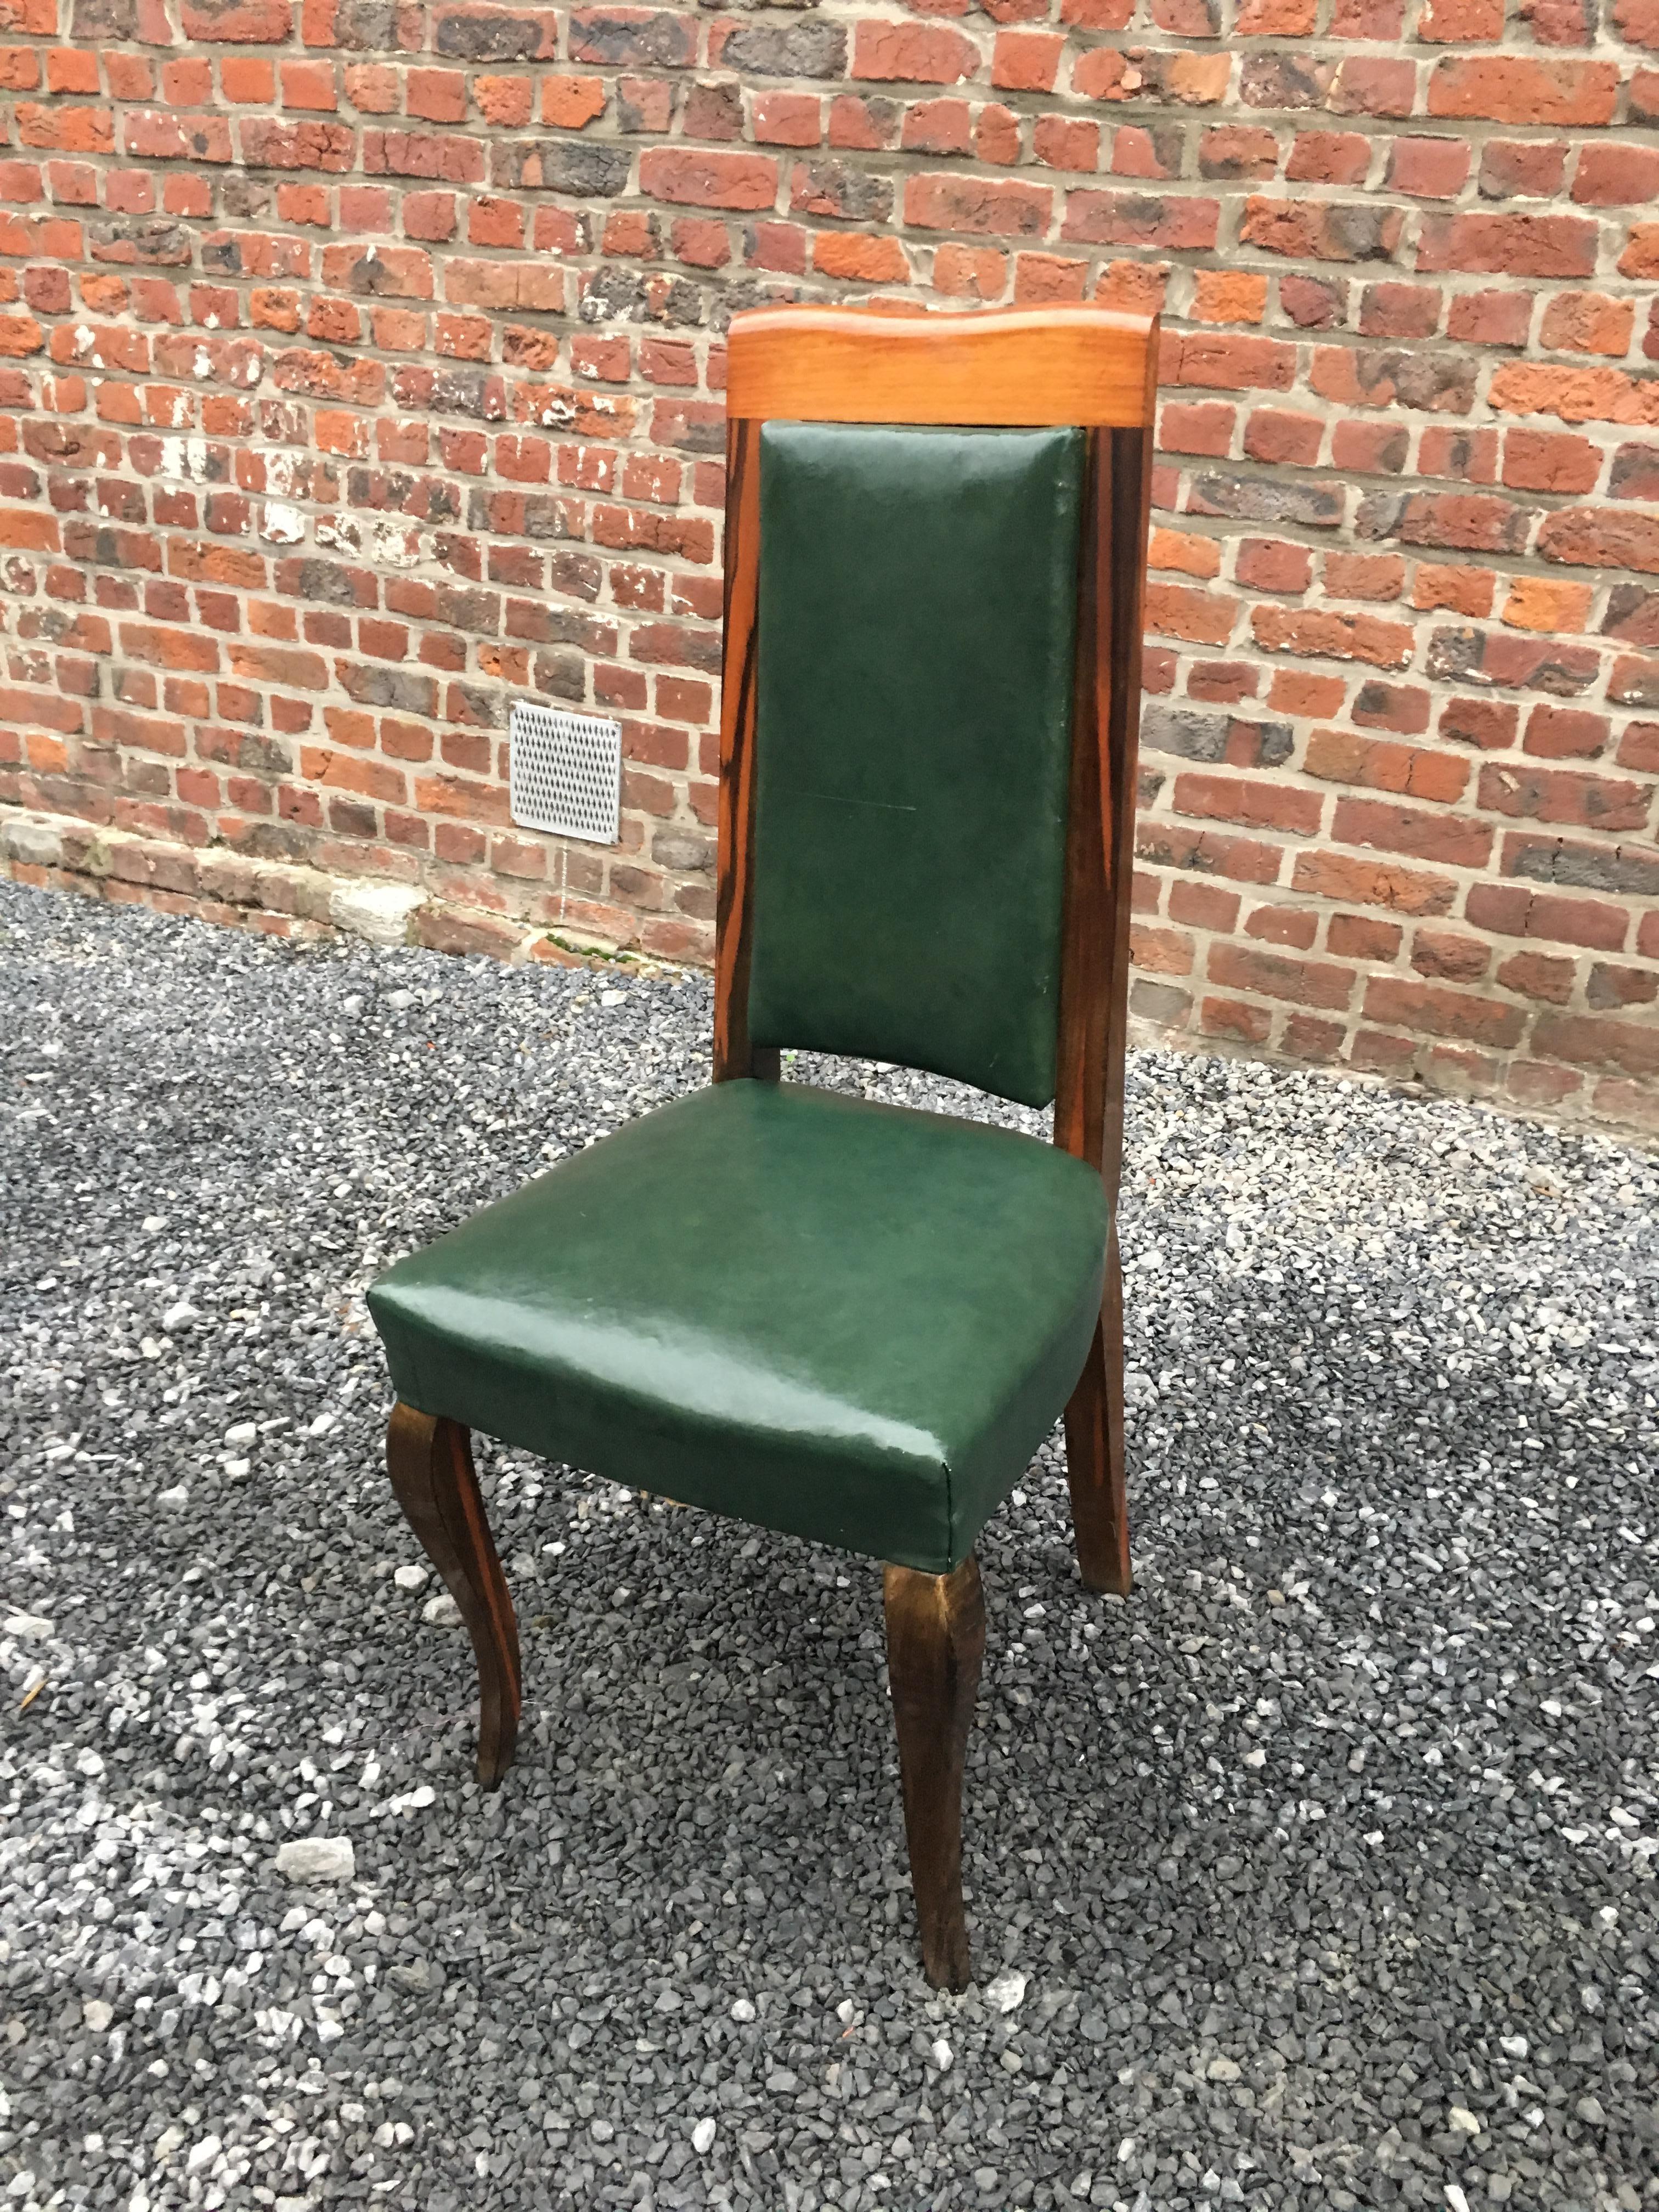 Suite of 8 Art Deco chairs in Macassar ebony, mahogany and leather
The general condition is very good
tiny scratches on the leather,.
Do not require a complete restoration.